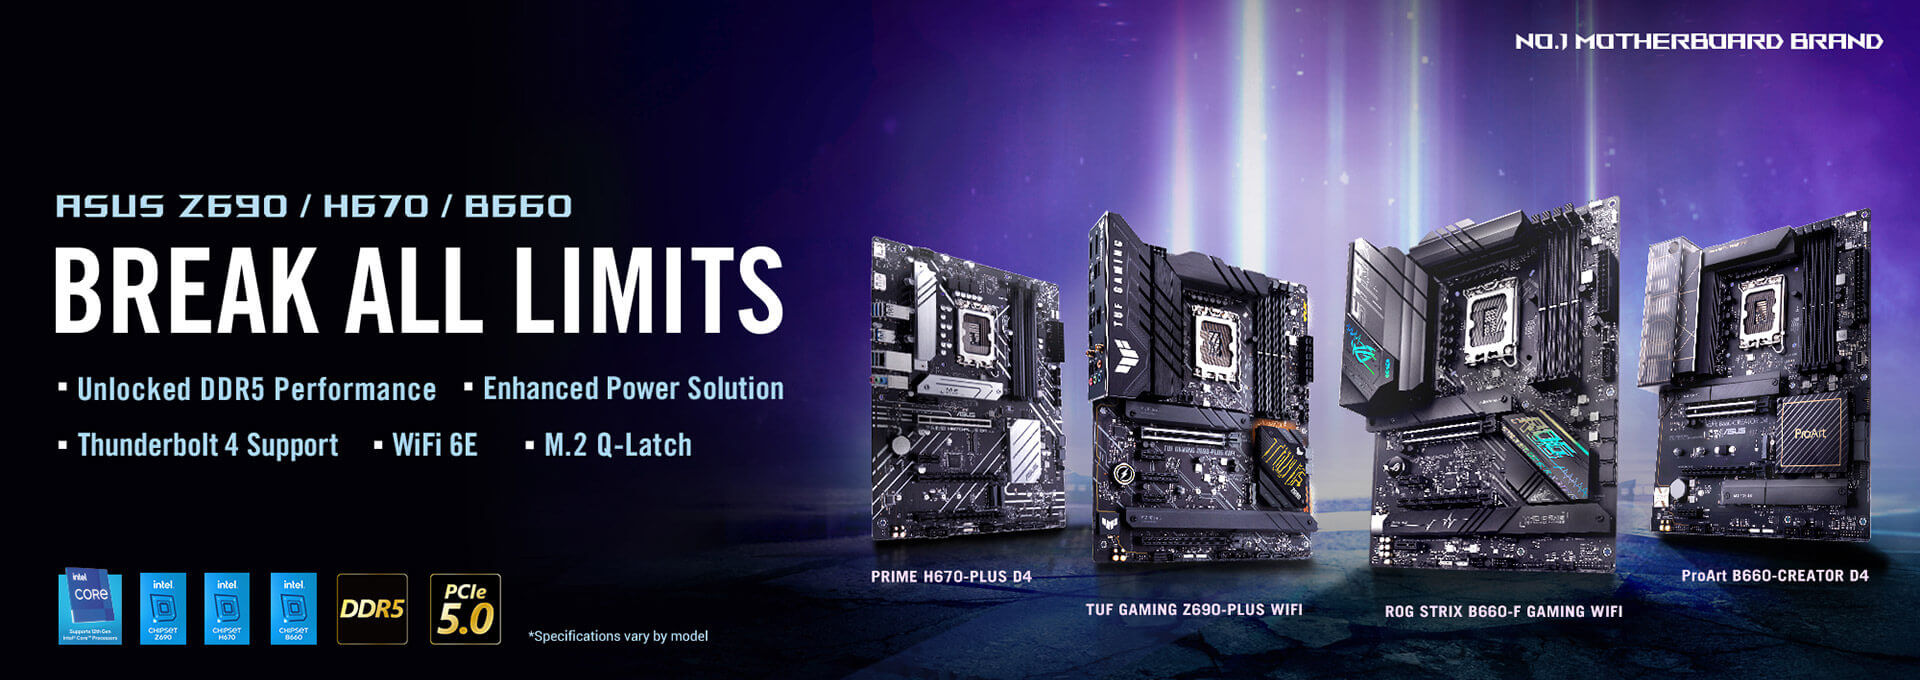 Asus Z690 Series The Best Motherboards For 12th Gen Intel Alder Lake Cpus